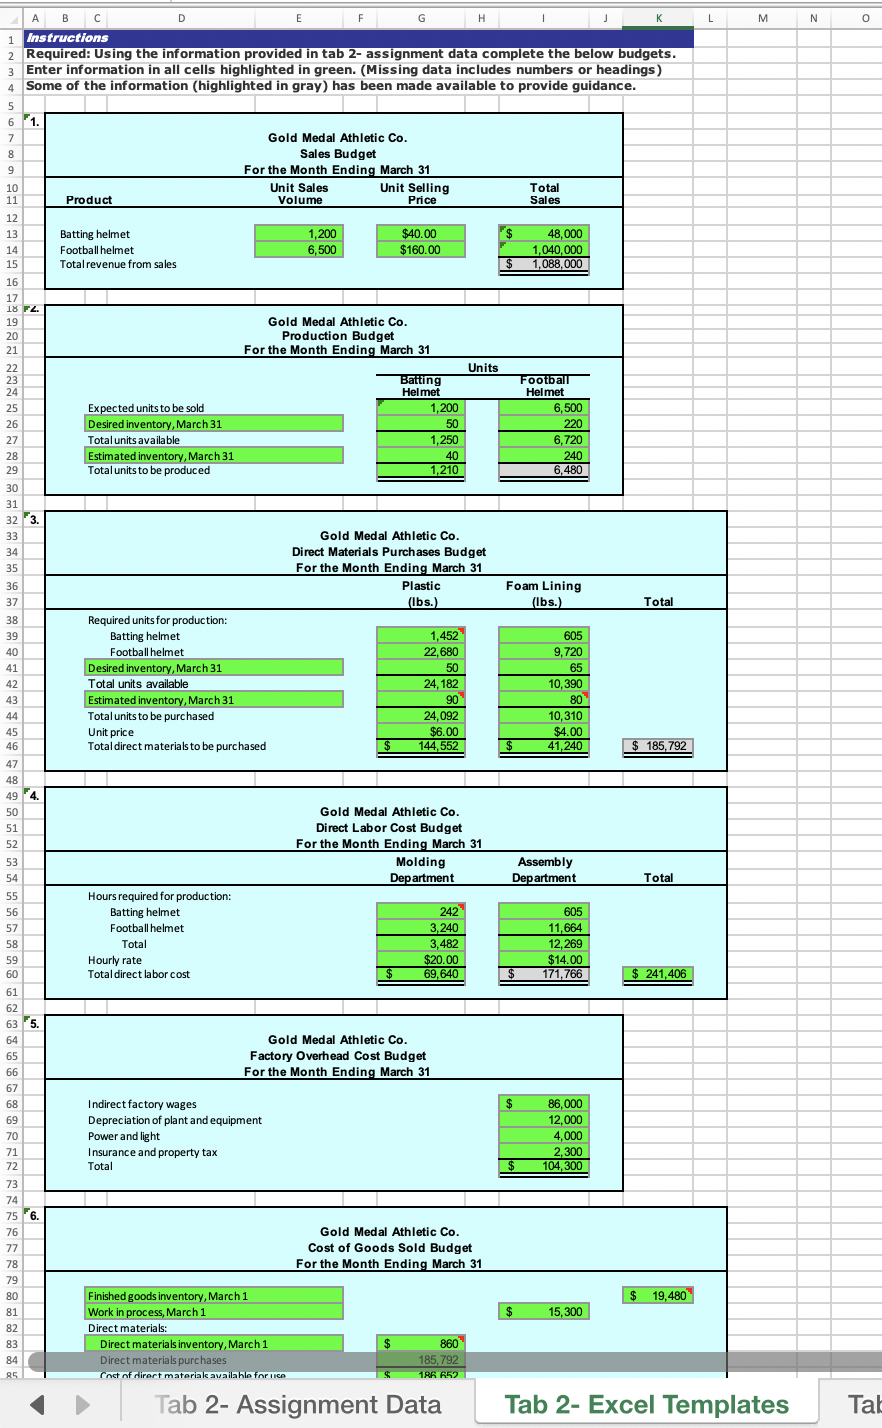 A
B
E
F
G
H
K
L
M
N
1 Instructions
2 Required: Using the information provided in tab 2- assignment data complete the below budgets.
Enter information in all cells highlighted in green. (Missing data includes numbers or headings)
4
Some of the information (highlighted in gray) has been made available to provide guidance.
6.
1.
Gold Medal Athletic Co.
Sales Budget
For the Month Ending March 31
Unit Sales
7
8.
9.
10
11
Unit Selling
Price
Total
Sales
Product
Volume
12
1,200
6,500
$40.00
Batting helmet
Football helmet
Totalrevenue from sales
48,000
1,040,000
1,088,000
13
14
$160.00
15
16
17
18 FZ.
Gold Medal Athletic Co.
Production Budget
For the Month Ending March 31
19
20
21
Units
22
23
24
Batting
Helmet
Football
Helmet
6,500
25
Expected units to be sold
1,200
26
50
220
Desired inventory, March 31
Totalunits available
Estimated inventory, March 31
Totalunits to be produced
1,250
6,720
27
28
40
240
29
1,210
6,480
30
31
32 3.
33
Gold Medal Athletic Co.
Direct Materials Purchases Budget
For the Month Ending March 31
34
35
Plastic
Foam Lining
(Ibs.)
36
37
(Ibs.)
Total
38
Required units for production:
1,452
22,680
50
24, 182
90
24,092
$6.00
144, 552
39
Batting helmet
605
40
Football helmet
9,720
41
Desired inventory, March 31
65
10,390
80"
10,310
42
Total units available
43
Estimated inventory, March 31
44
Totalunits to be purchased
$4.00
41,240
45
Unit price
Totaldirect materials to be purchased
$ 185,792
46
2$
2$
47
48
49 4.
50
Gold Medal Athletic Co.
51
Direct Labor Cost Budget
52
For the Month Ending March 31
Molding
Department
Assembly
Department
53
54
Total
55
Hours required for production:
56
242
605
Batting helmet
Football helmet
3,240
3,482
$20.00
69,640
11,664
12,269
$14.00
171,766
57
58
Total
Hourly rate
Total direct labor cost
59
2$
2$
$ 241,406
60
61
62
63 5.
64
Gold Medal Athletic Co.
65
Factory Overhead Cost Budget
66
For the Month Ending March 31
67
Indirect factory wages
86,000
12.000
68
69
Depreciation of plant and equipment
Power and light
Insurance and property tax
Total
4,000
2,300
104, 300
70
71
72
2$
73
74
75 "6.
76
Gold Medal Athletic Co.
77
Cost of Goods Sold Budget
78
For the Month Ending March 31
79
80
Finished goods inventory, March 1
$ 19,480
81
Work in process, March 1
2$
15,300
82
Direct materials:
83
Direct materials inventory, March 1
860
185, 792
186 652
84
Direct materials purchases
Coct of direct materiak availa hle for use
85
Tab 2- Assignment Data
Tab 2- Excel Templates
Tab
